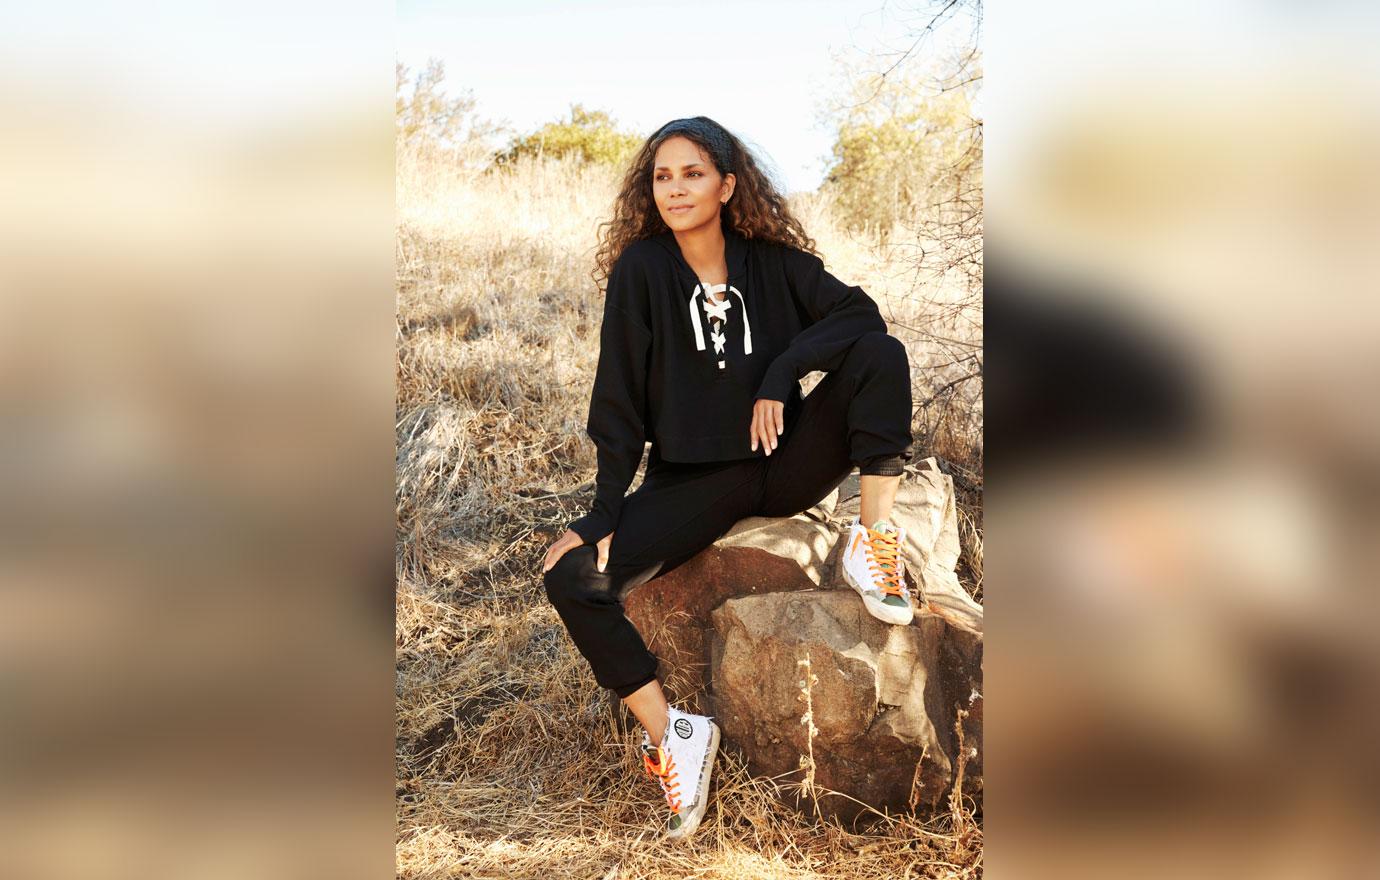 Halle Berry, Sweaty Betty Team on Second Athleisure Collection